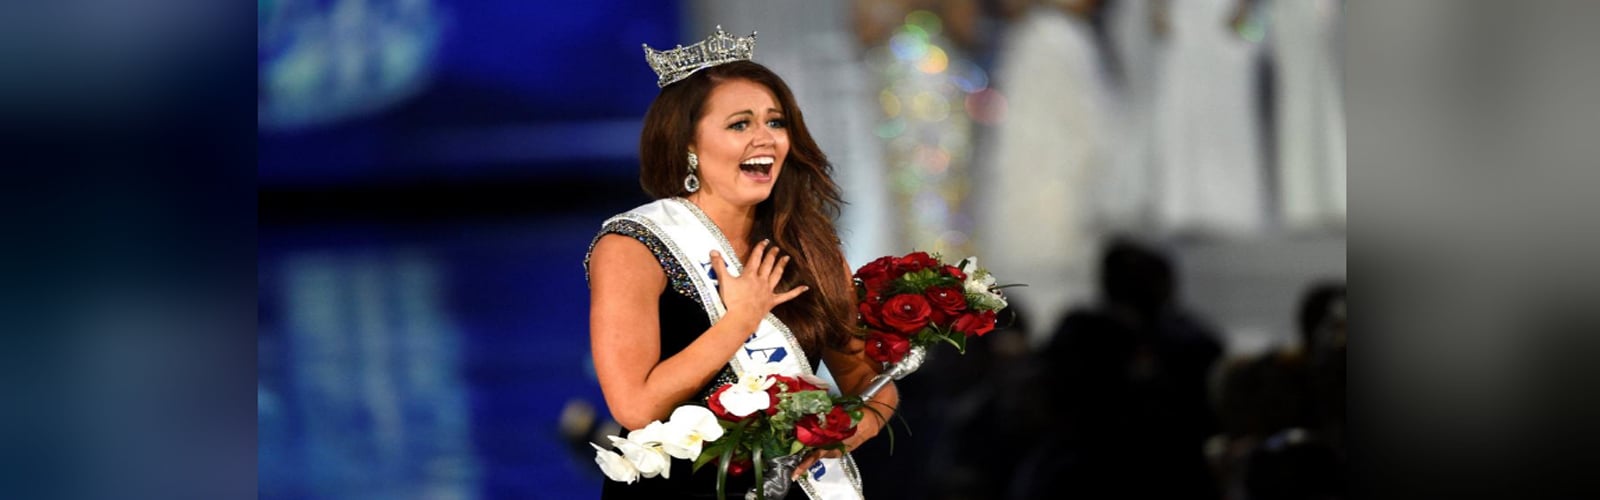 Ivy League graduate and dance champion crowned Miss America